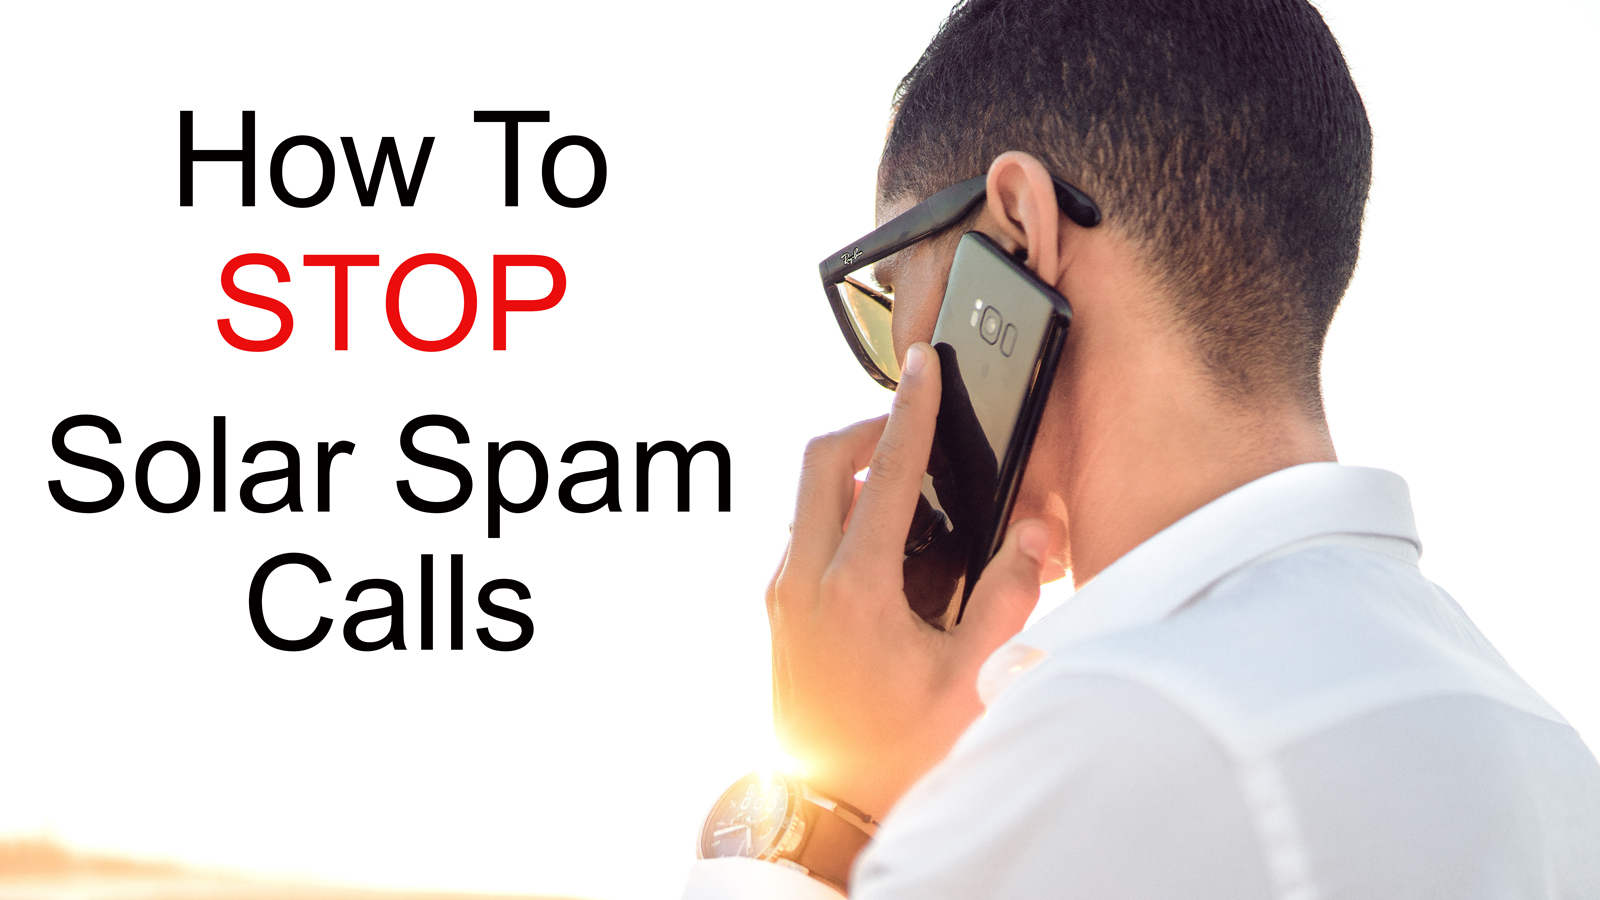 How to Stop Solar Spam Calls (Updated 2018)